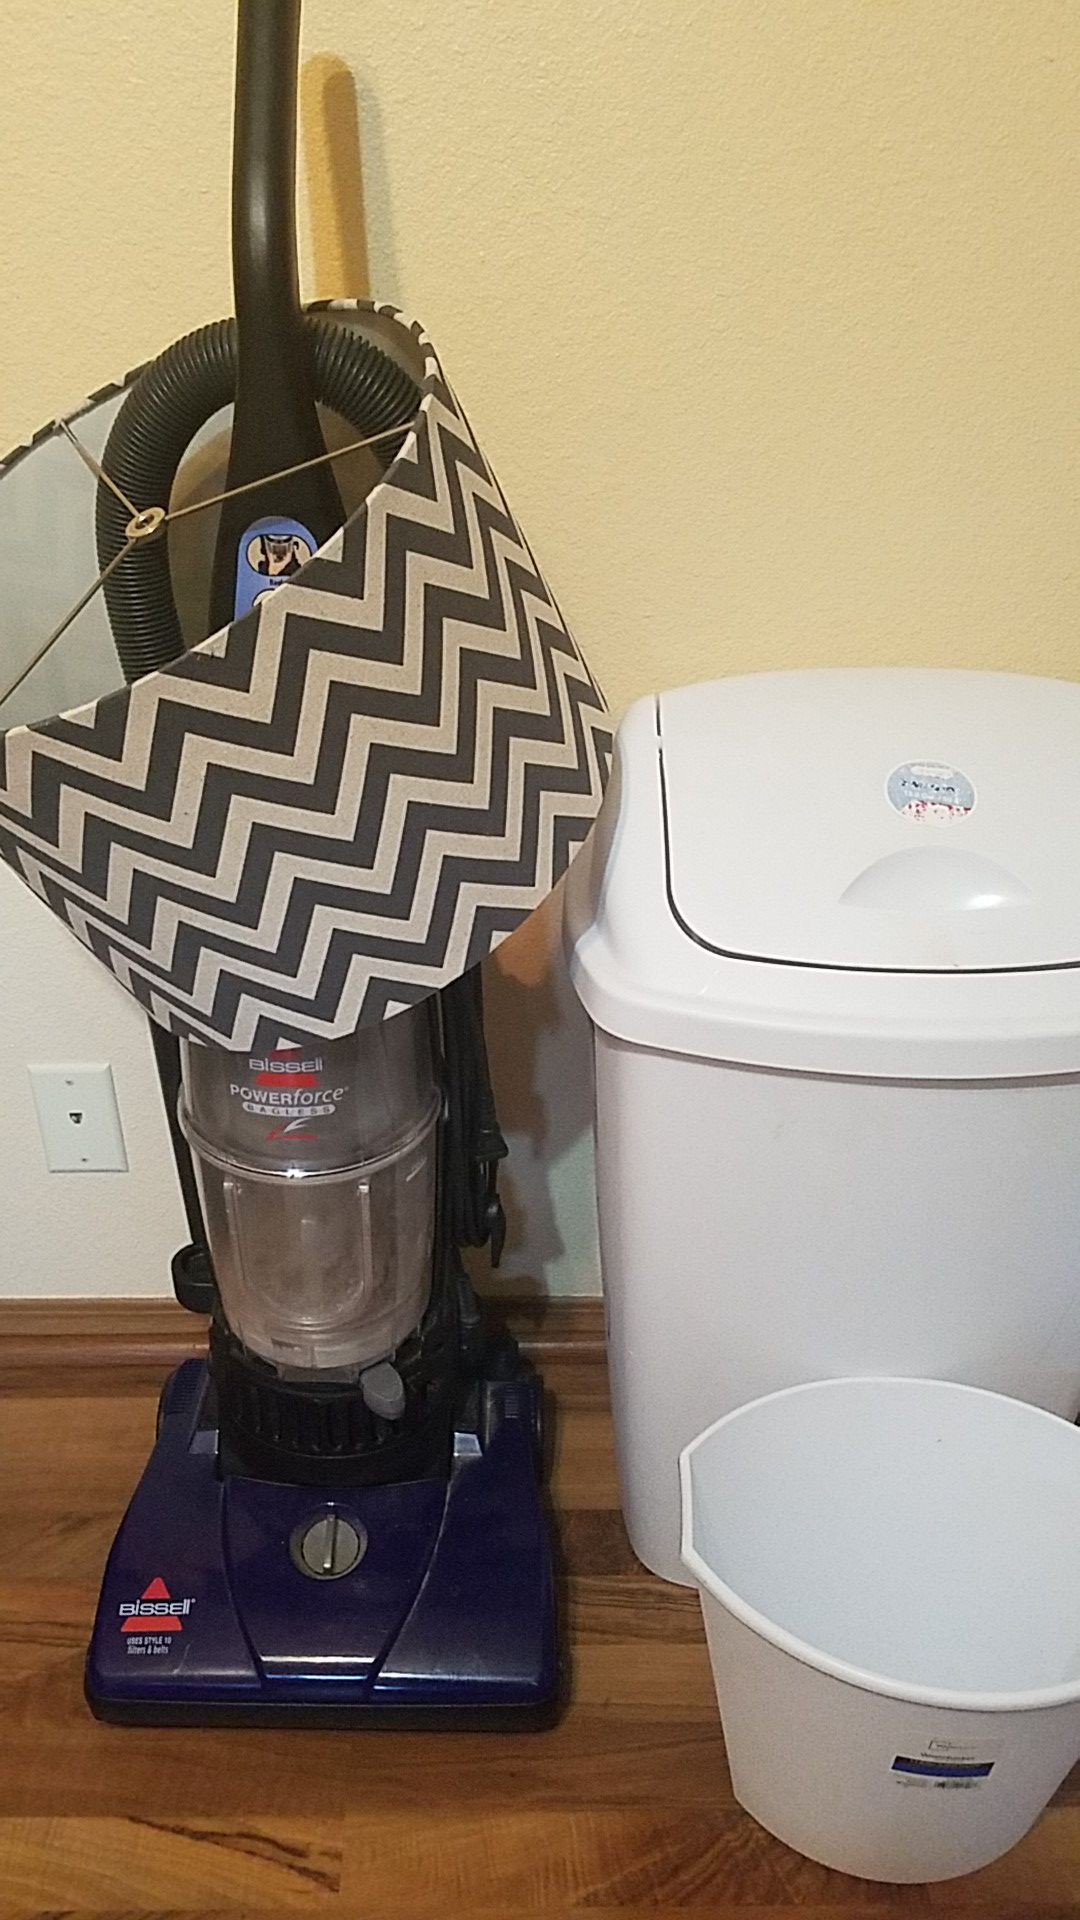 Bissell vacuum cleaner,lampshade,kitchen trash can and bathrooms trash can